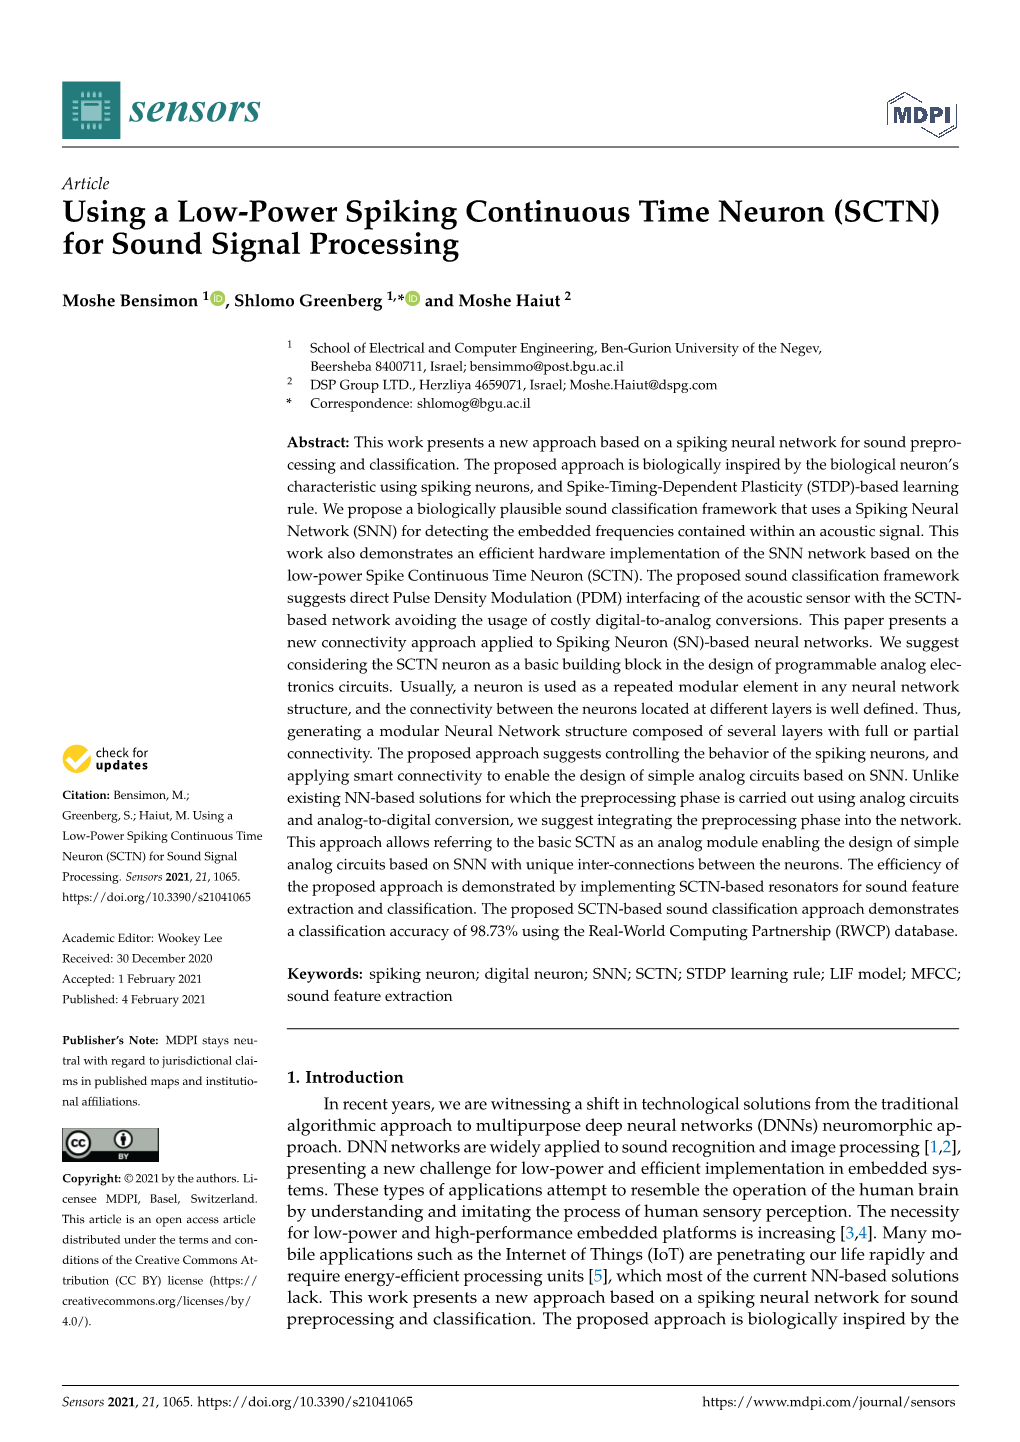 Using a Low-Power Spiking Continuous Time Neuron (SCTN) for Sound Signal Processing